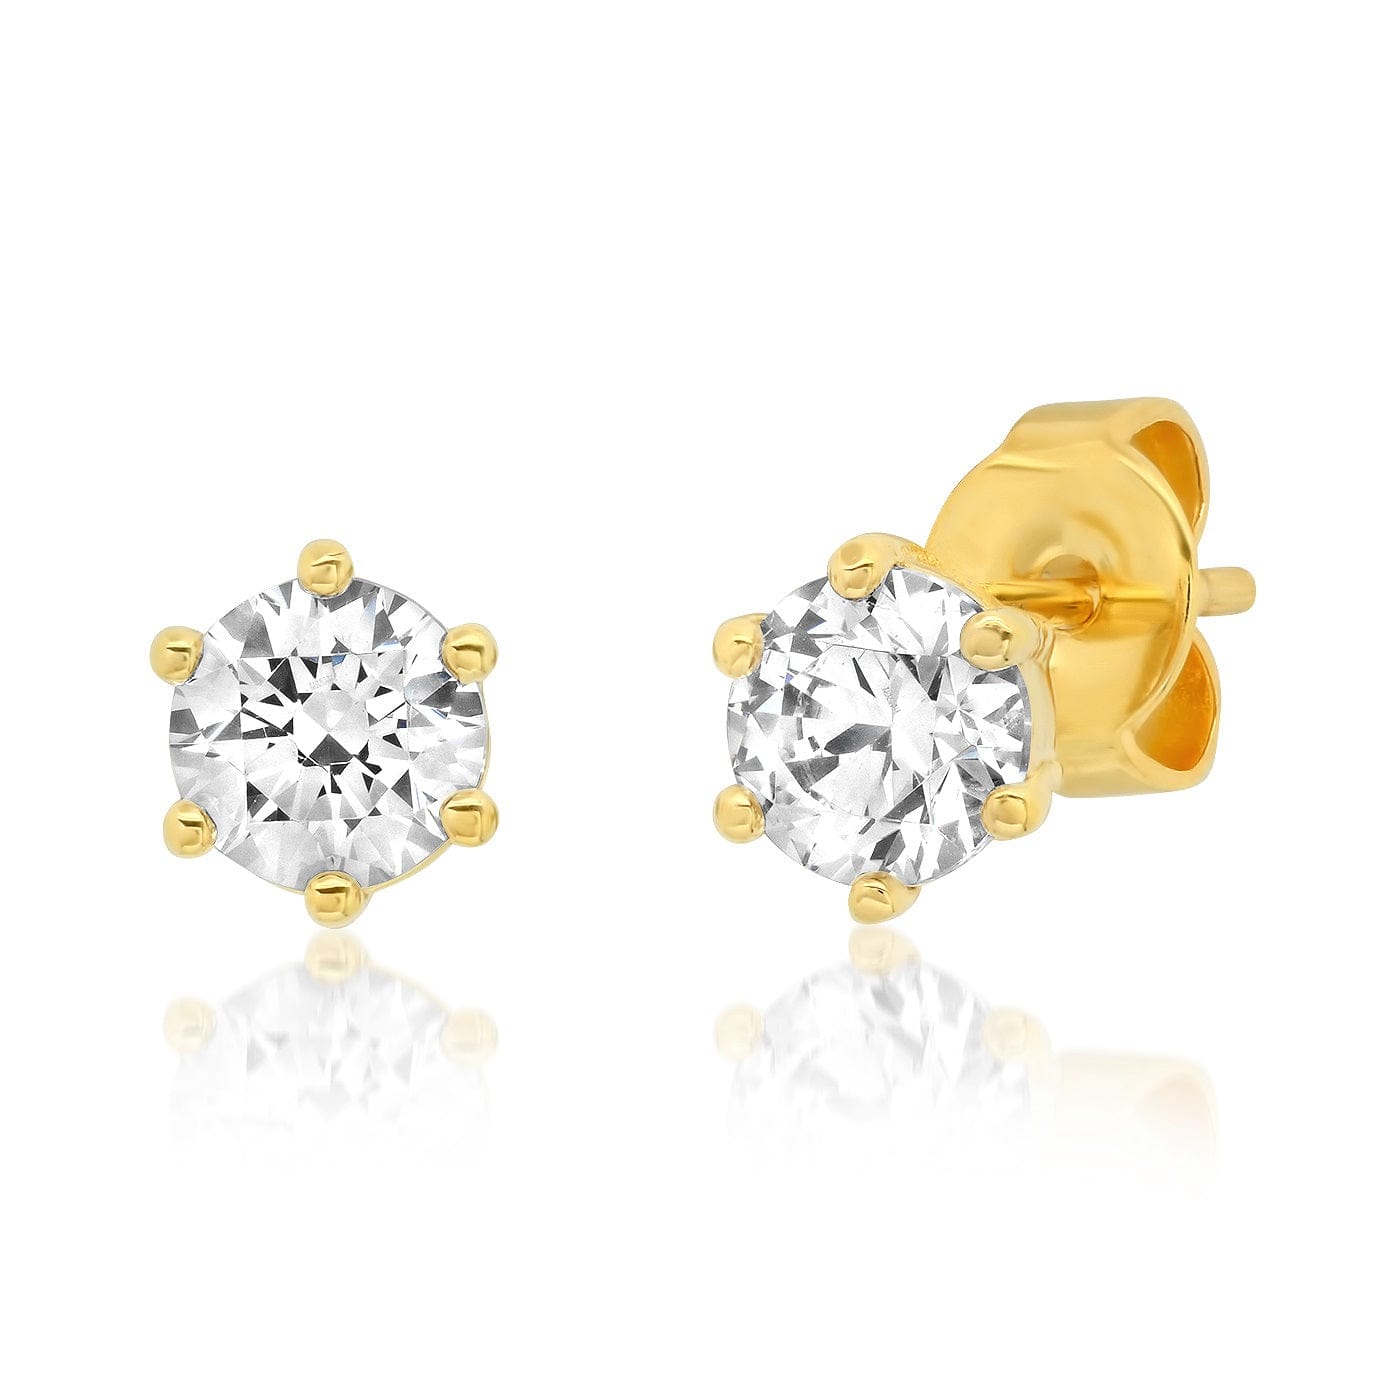 TAI JEWELRY Earrings Gold Vermeil Solitaire Cz Stud